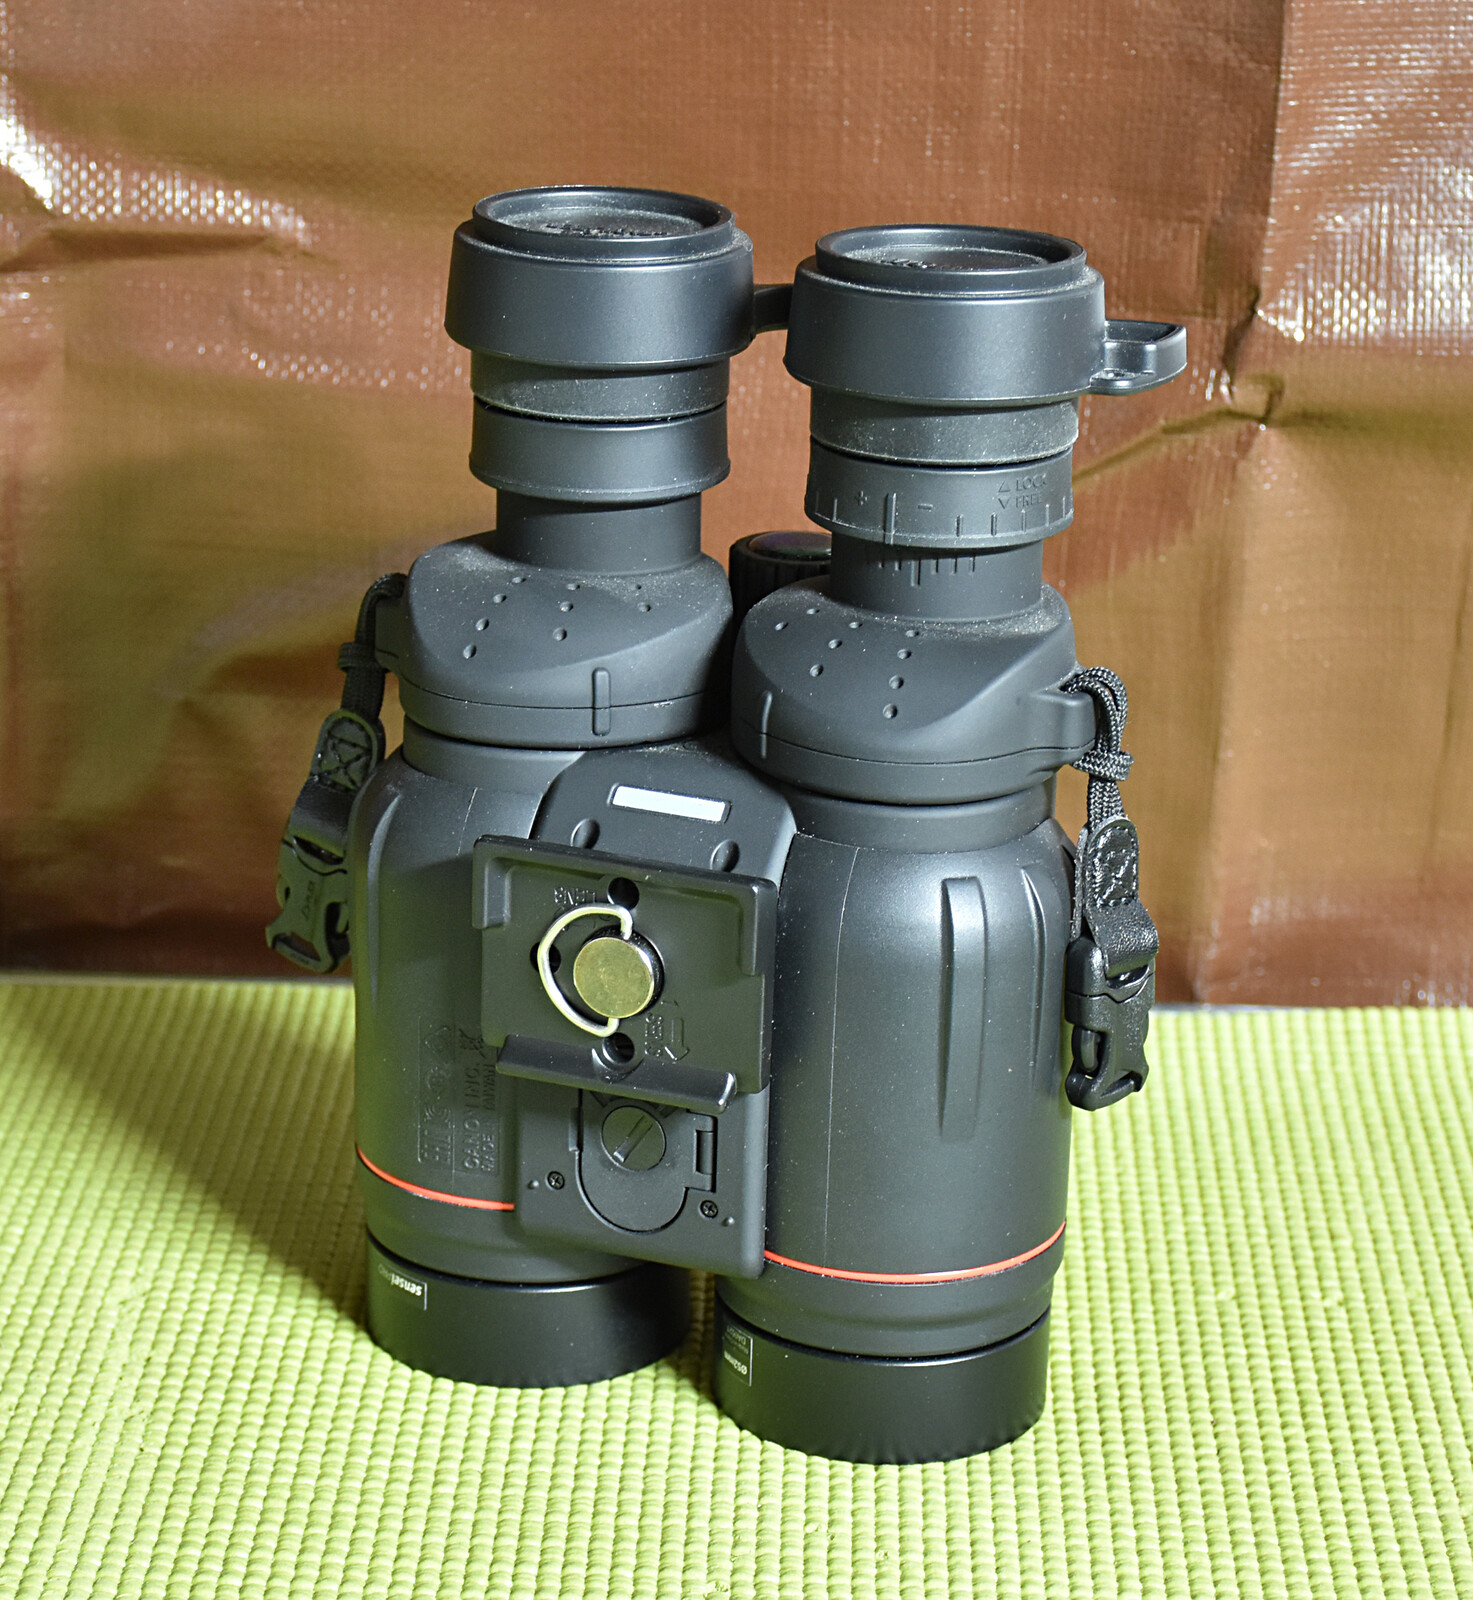 Canon 10x42L with quick release